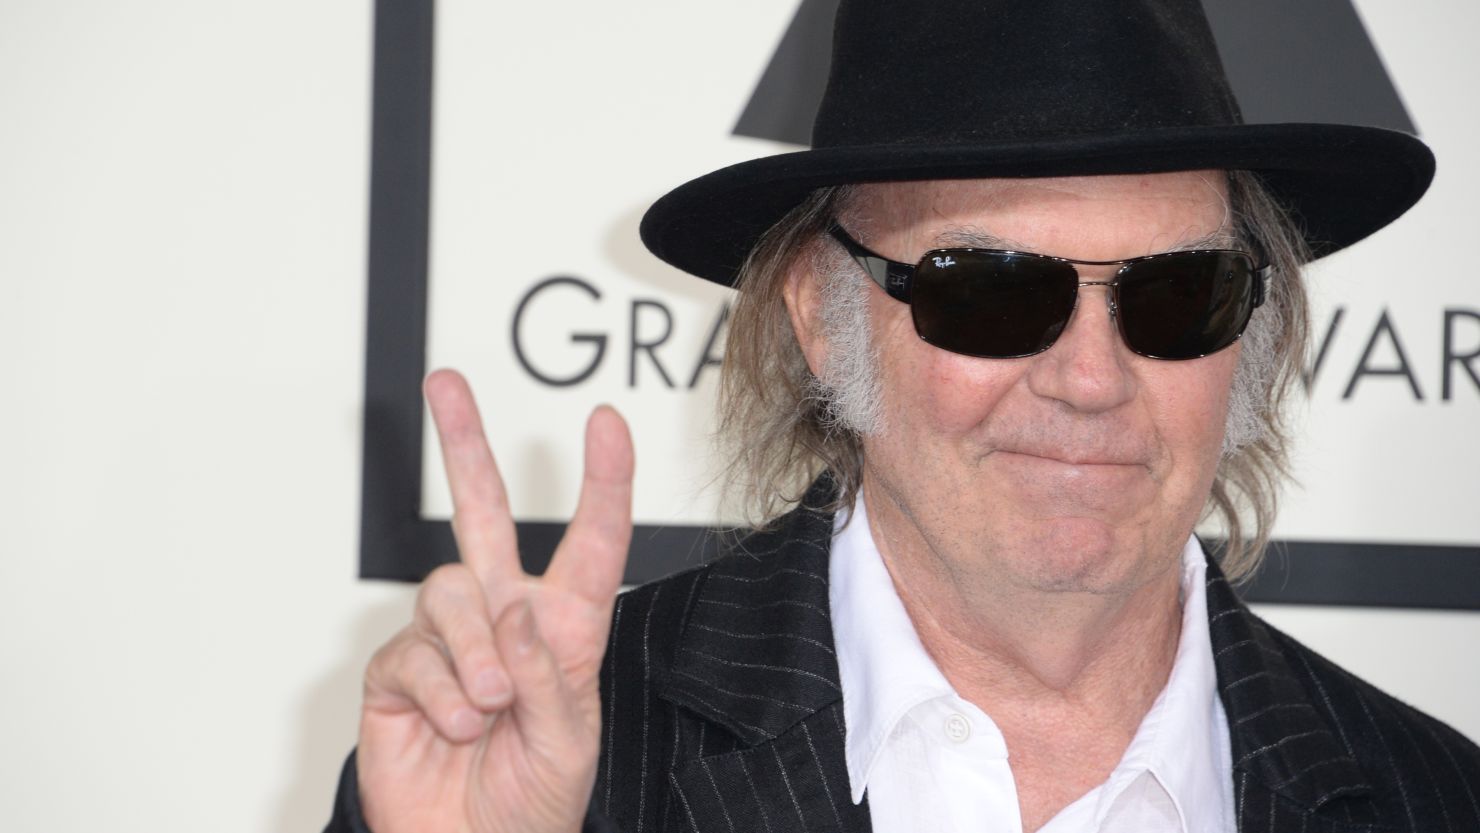 Neil Young's Pono online store and PonoPlayer device feature high-resolution digital music.